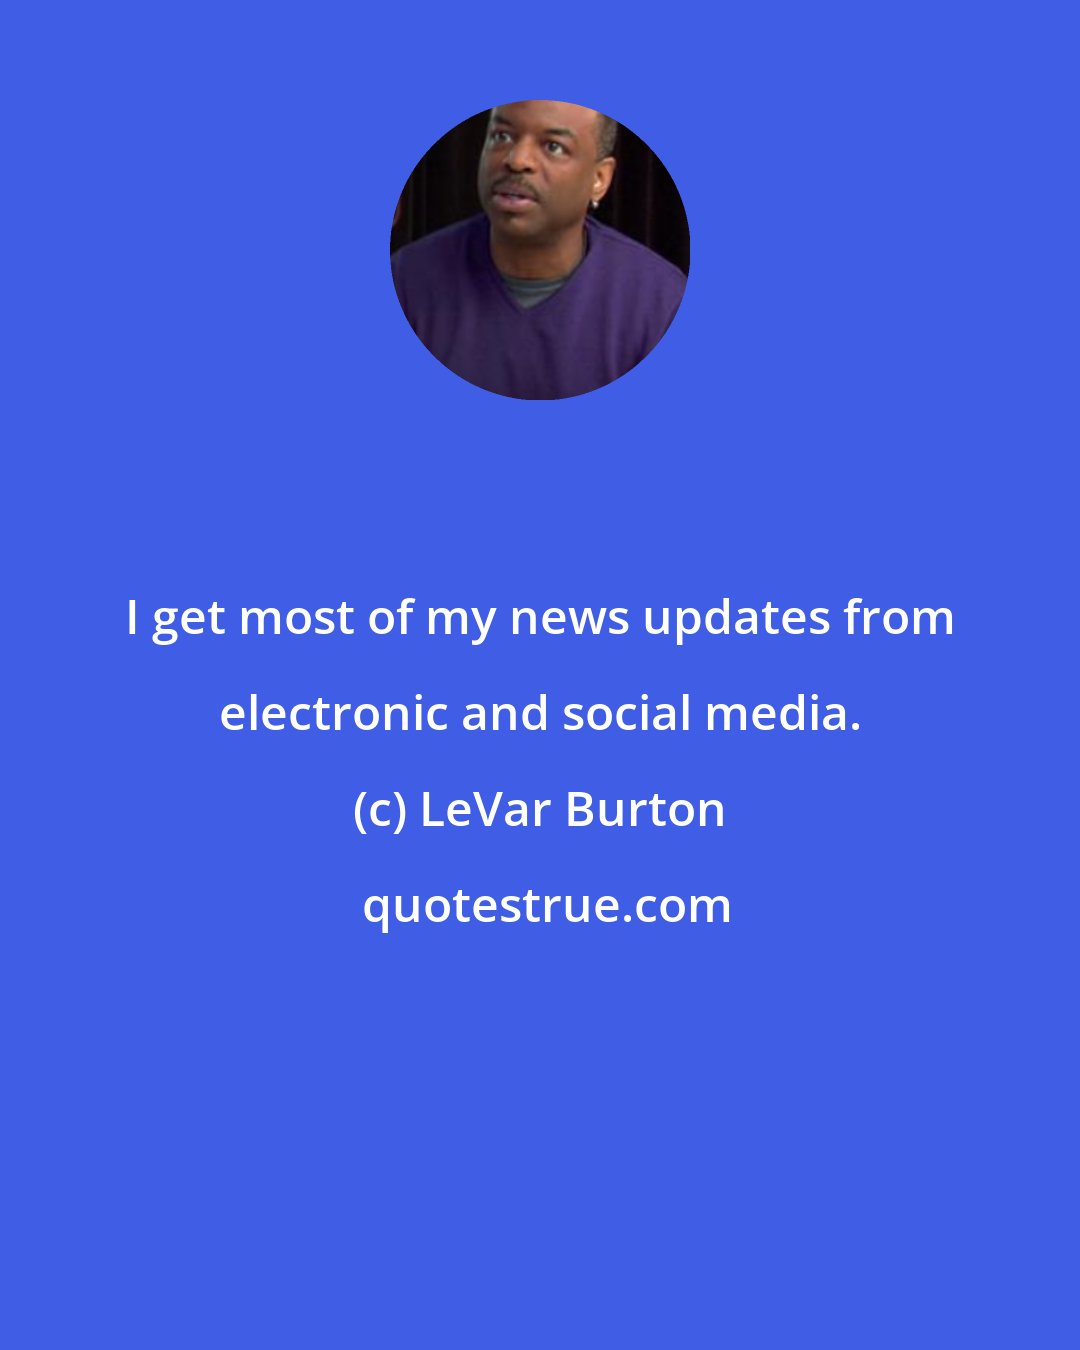 LeVar Burton: I get most of my news updates from electronic and social media.